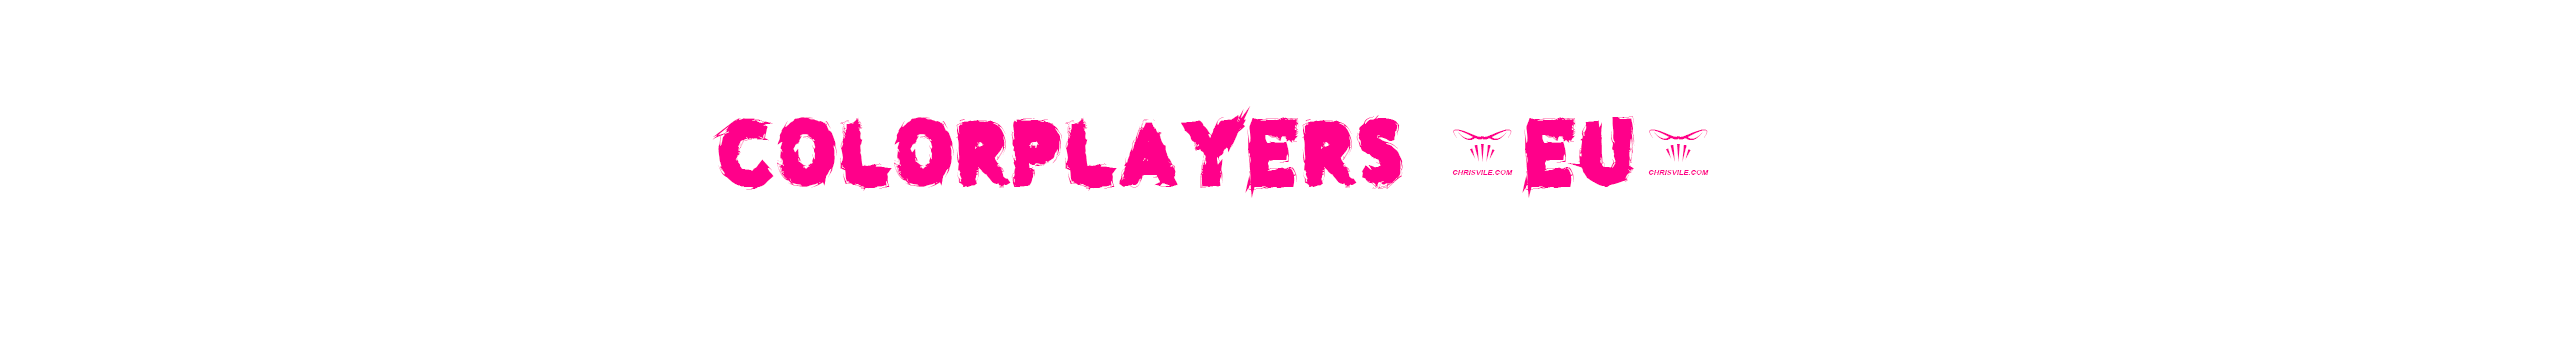 #ColorPlayers.png